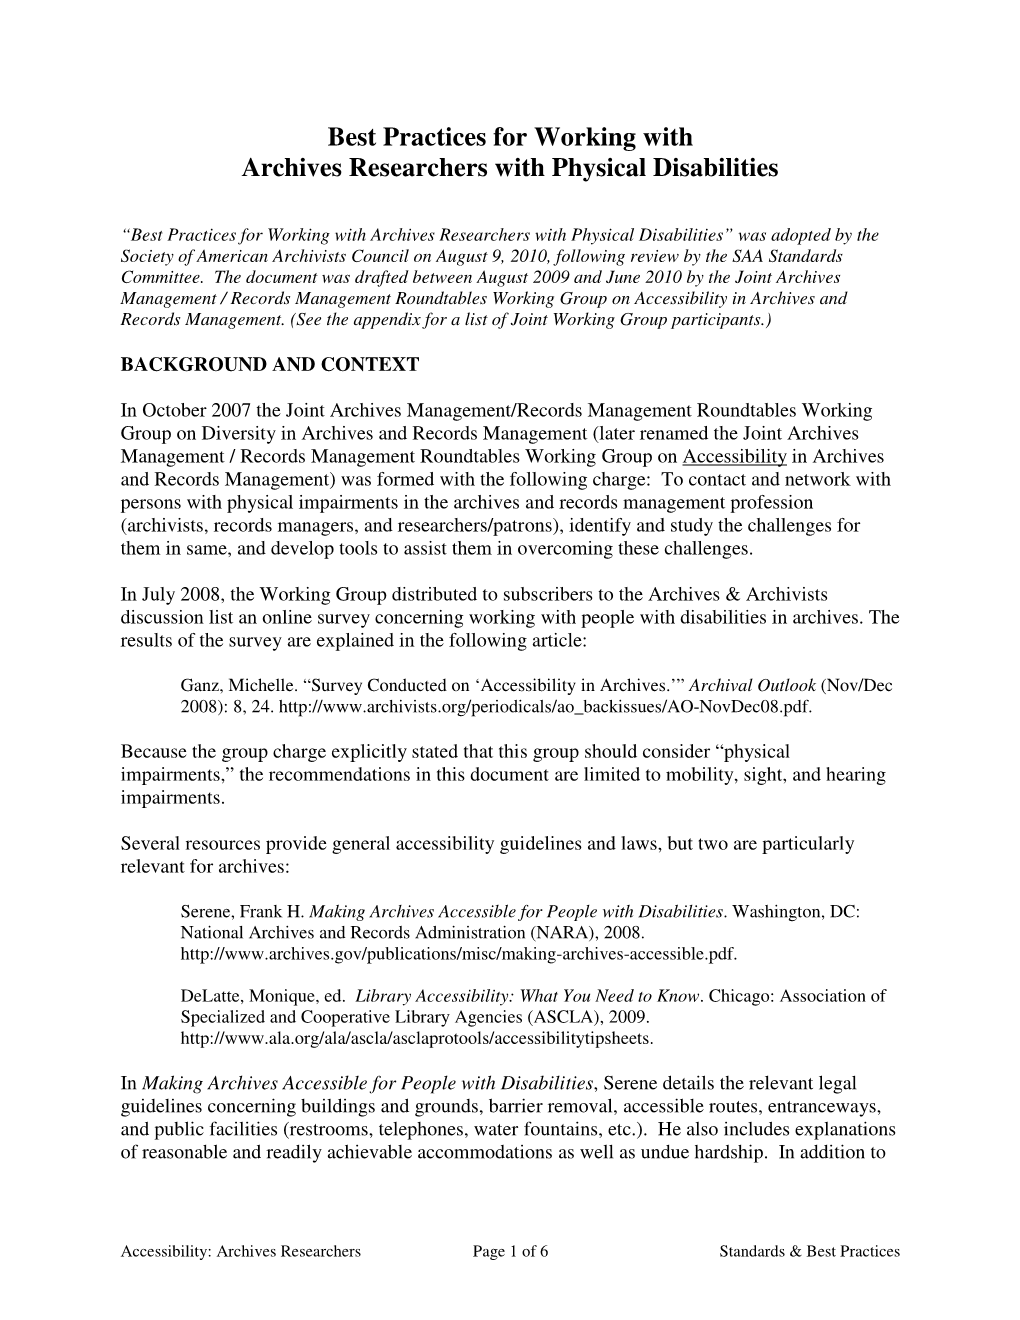 Best Practices for Working with Archives Researchers with Physical Disabilities